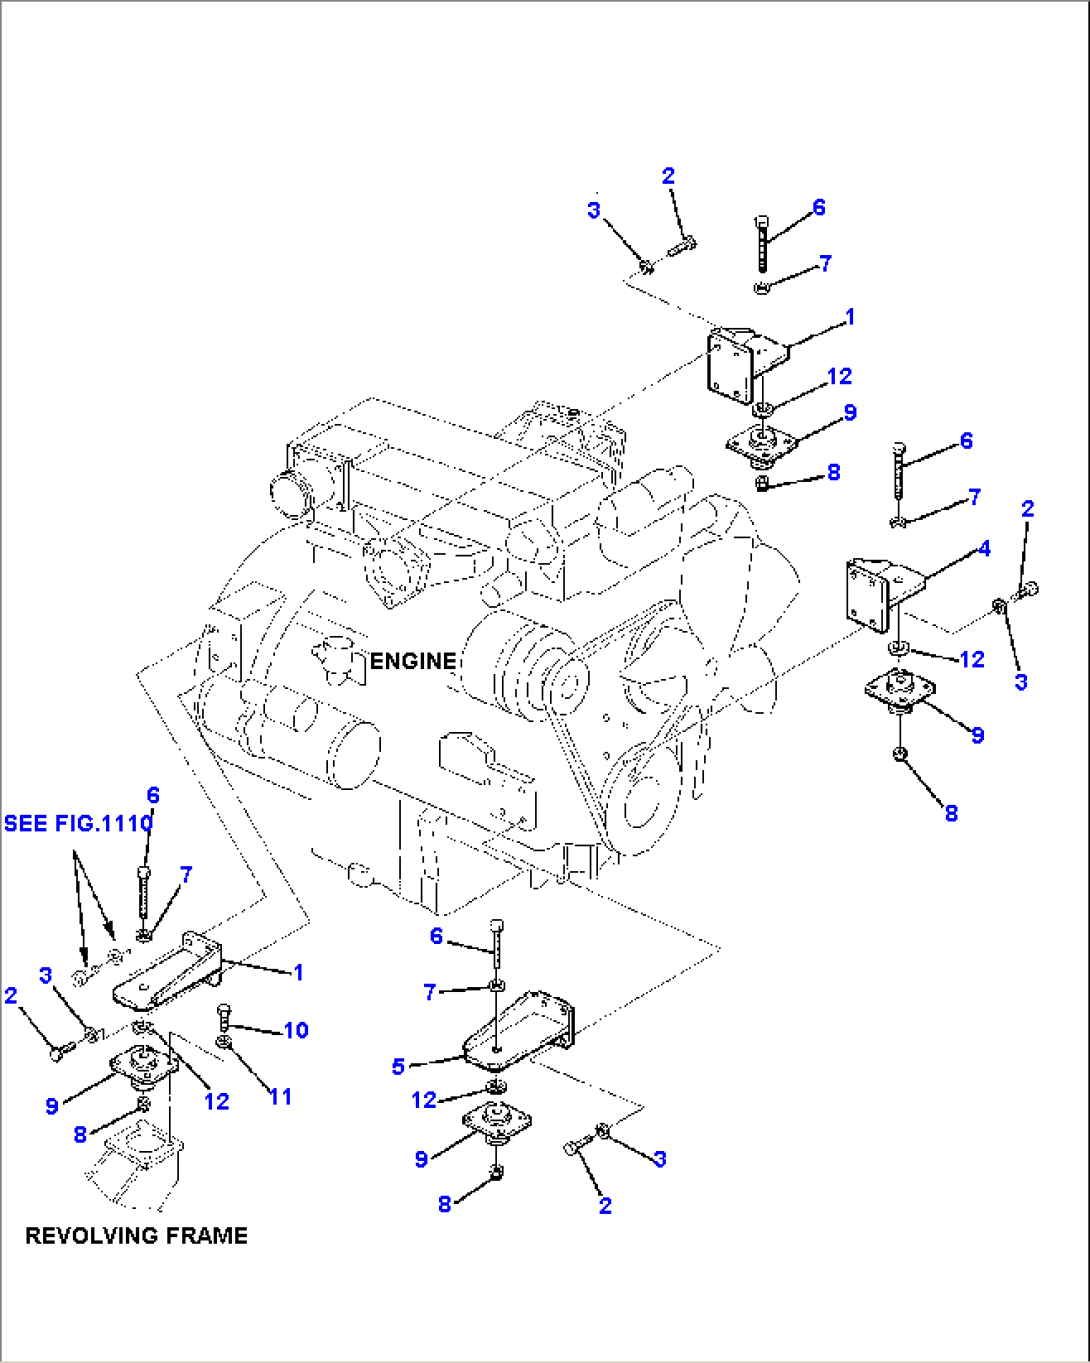 ENGINE MOUNTING PART